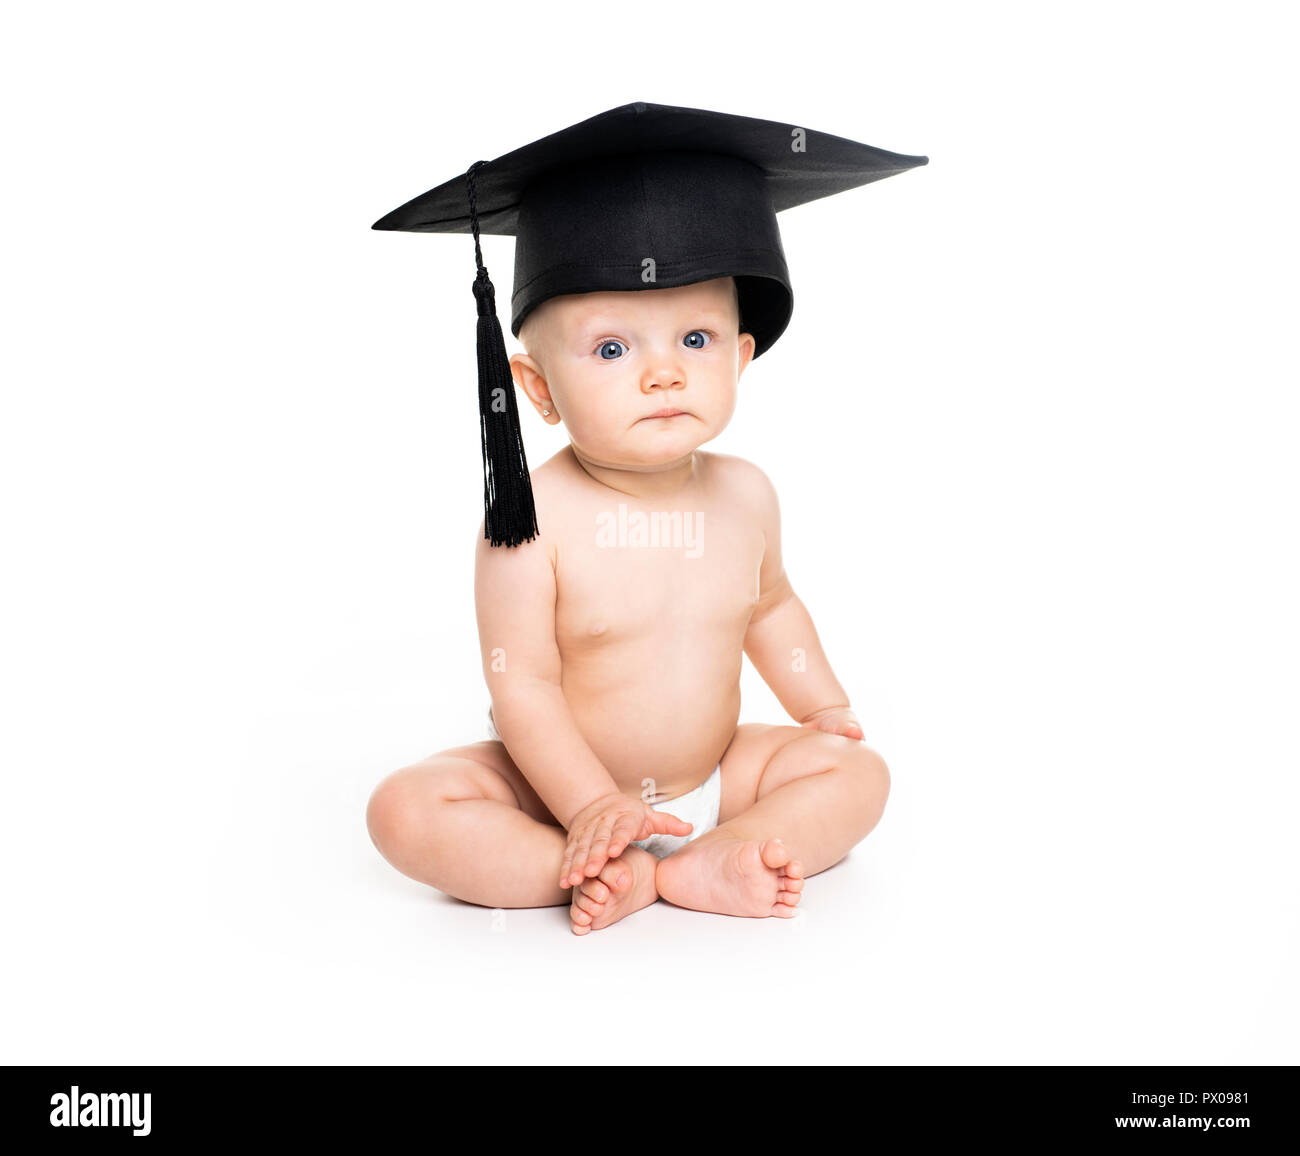 A Portrait of a sitting baby girl with a graduation cap Stock Photo